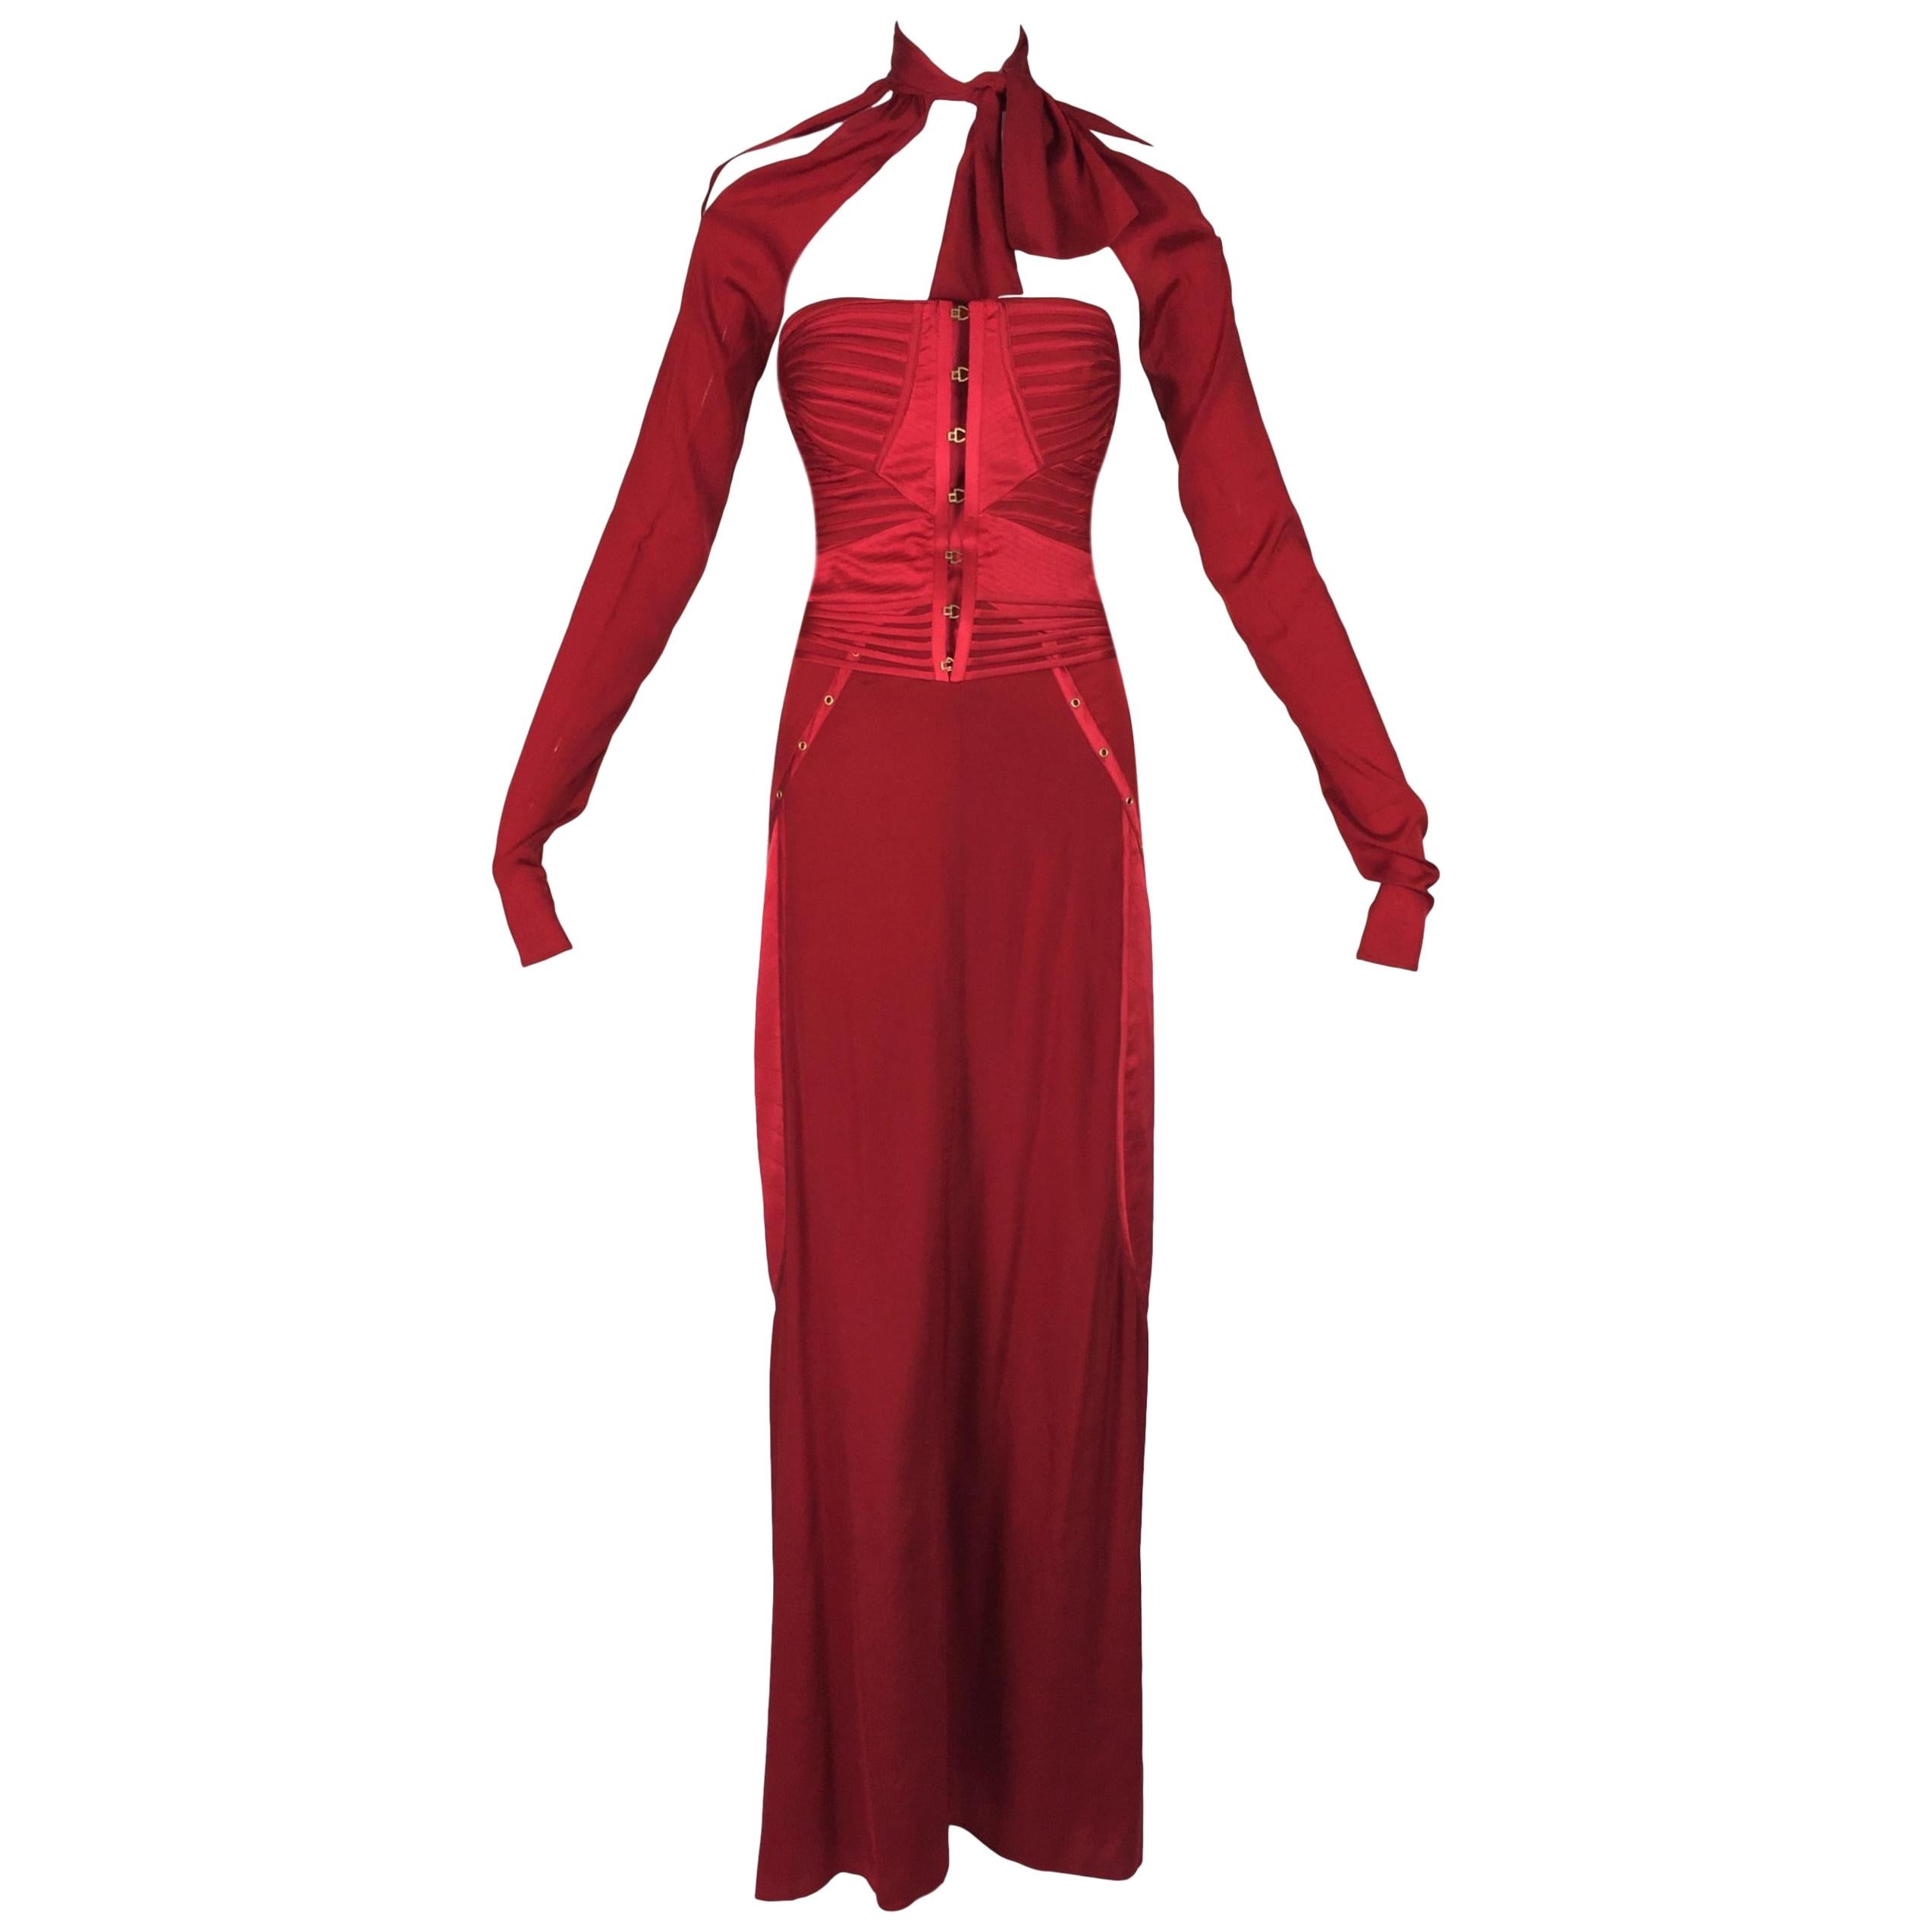 F/W 2003 Gucci by Tom Ford Runway Red Strapless Corset Gown Dress at ...